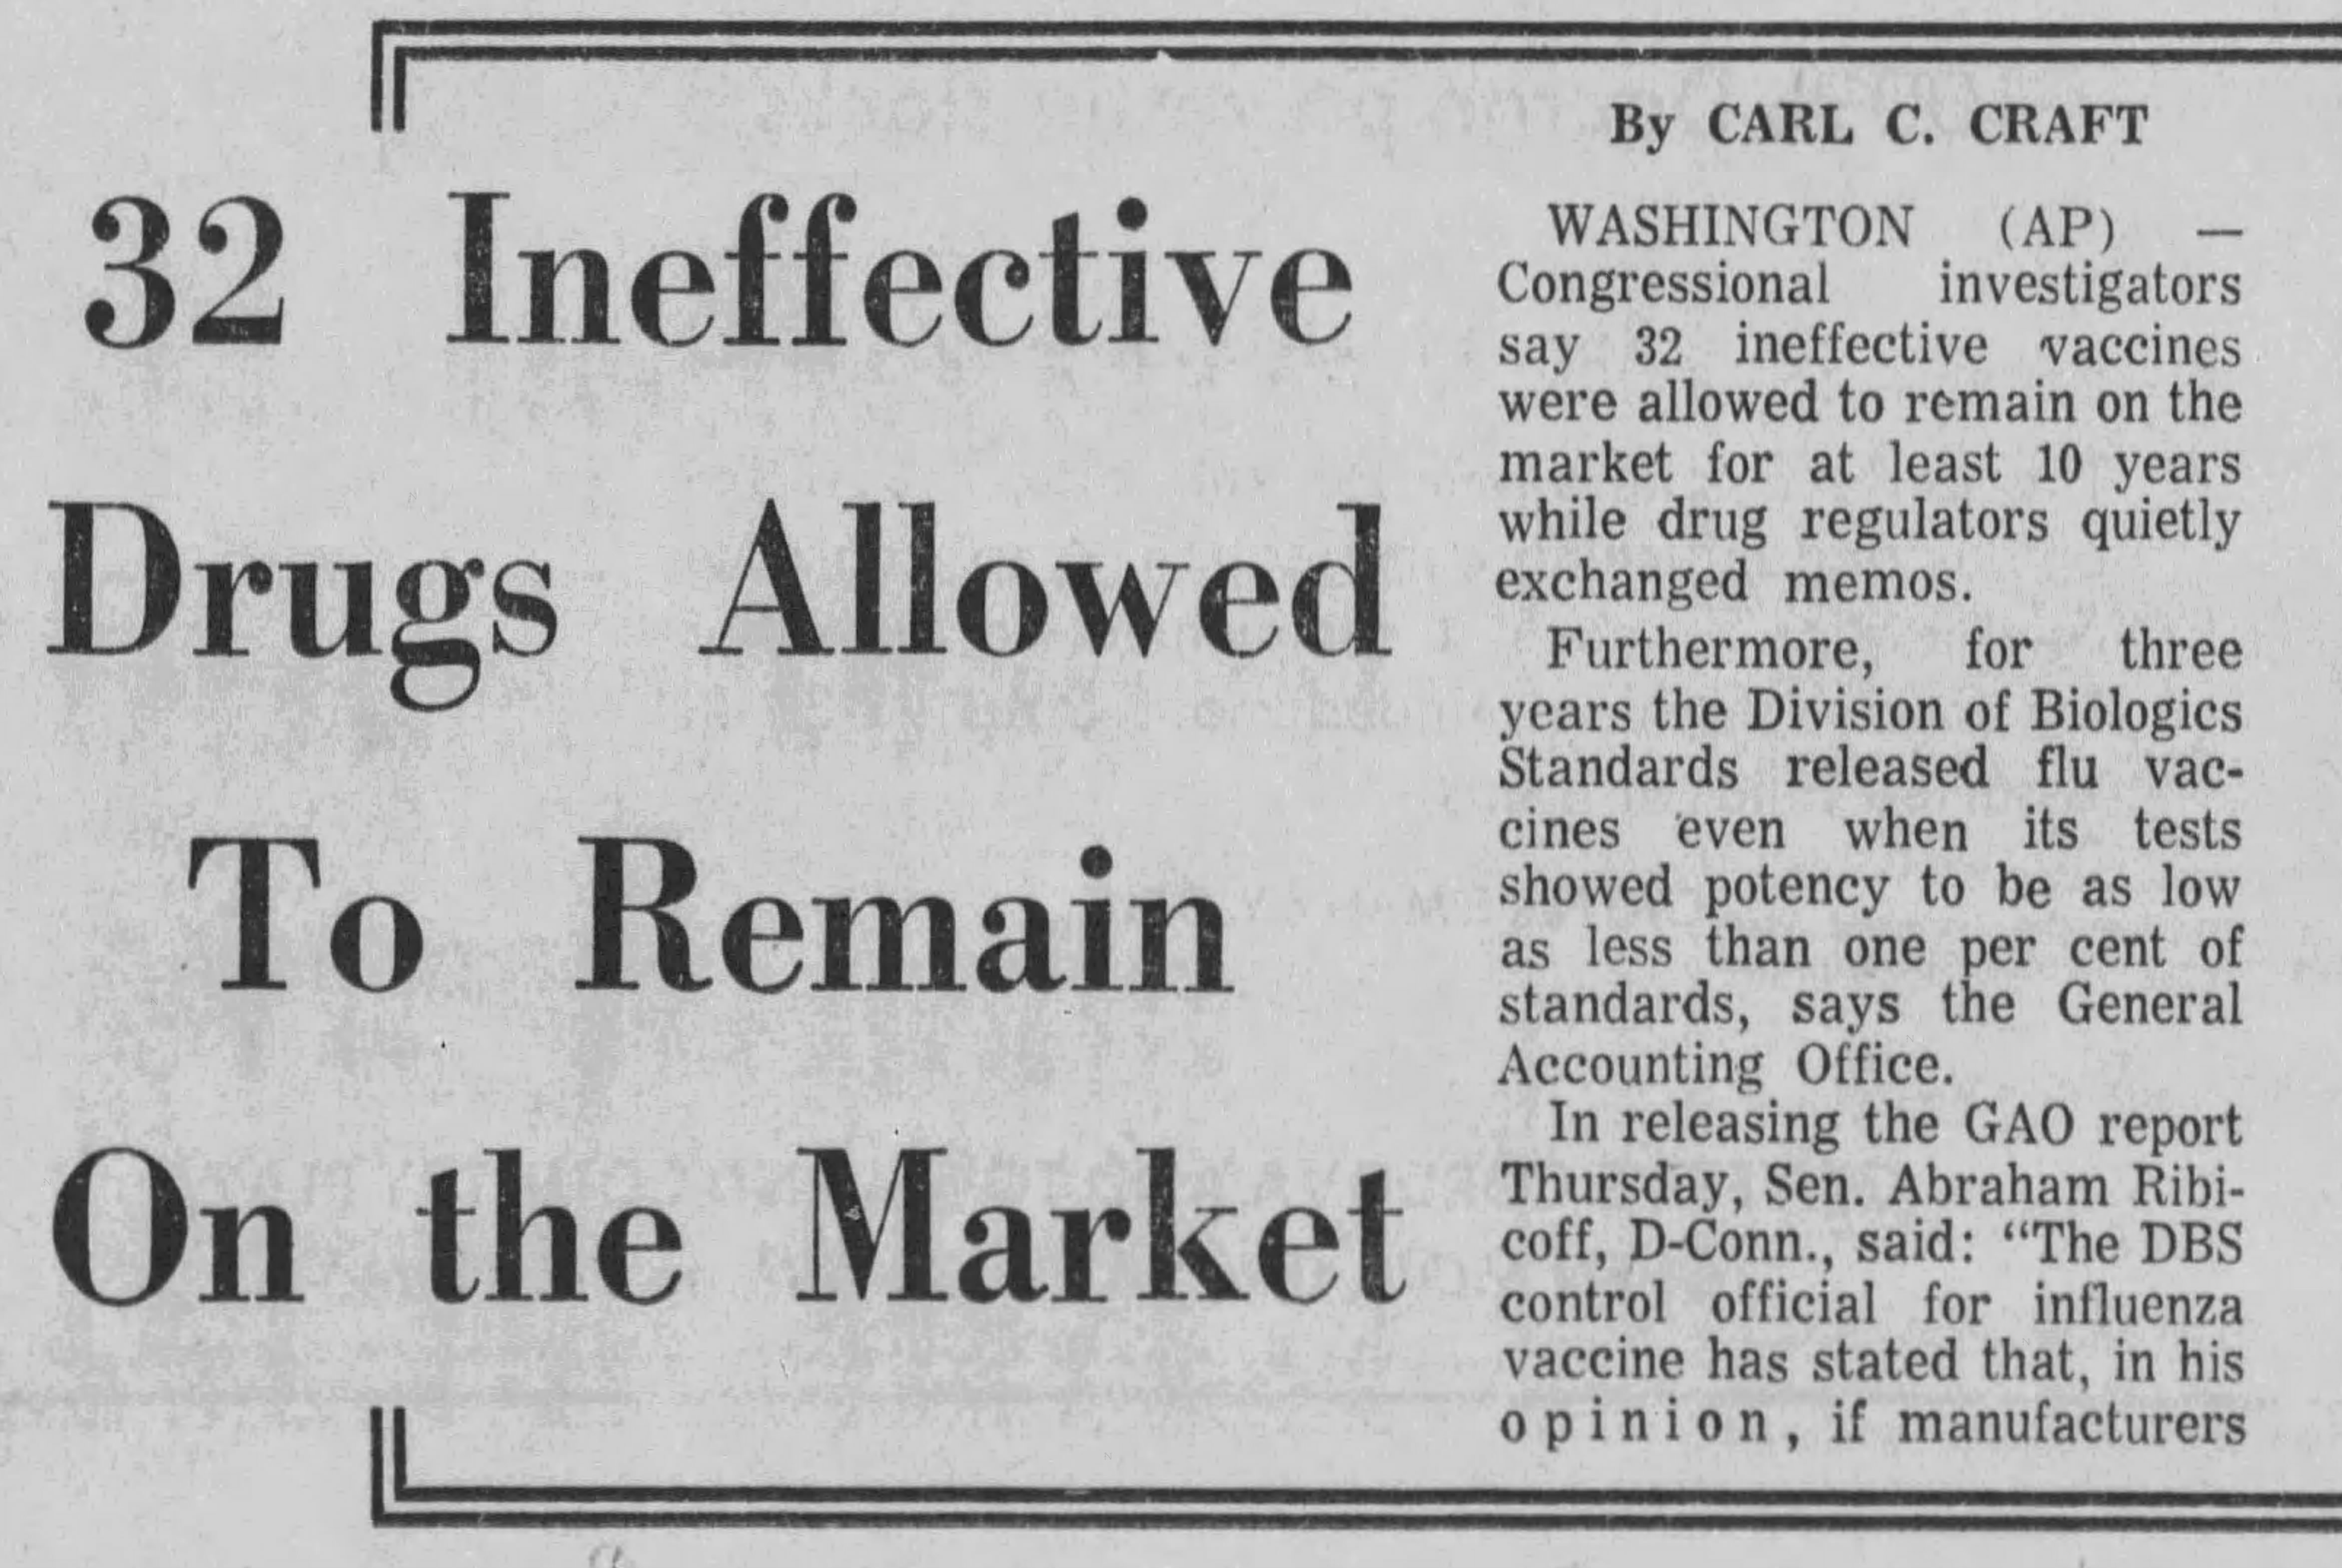 a newspaper clipping about a GAO report released in March 1972 called out DBS for allowing hypopotent vaccines to remain on the market, from the Pensacola News Journal on Friday March 31, 1972